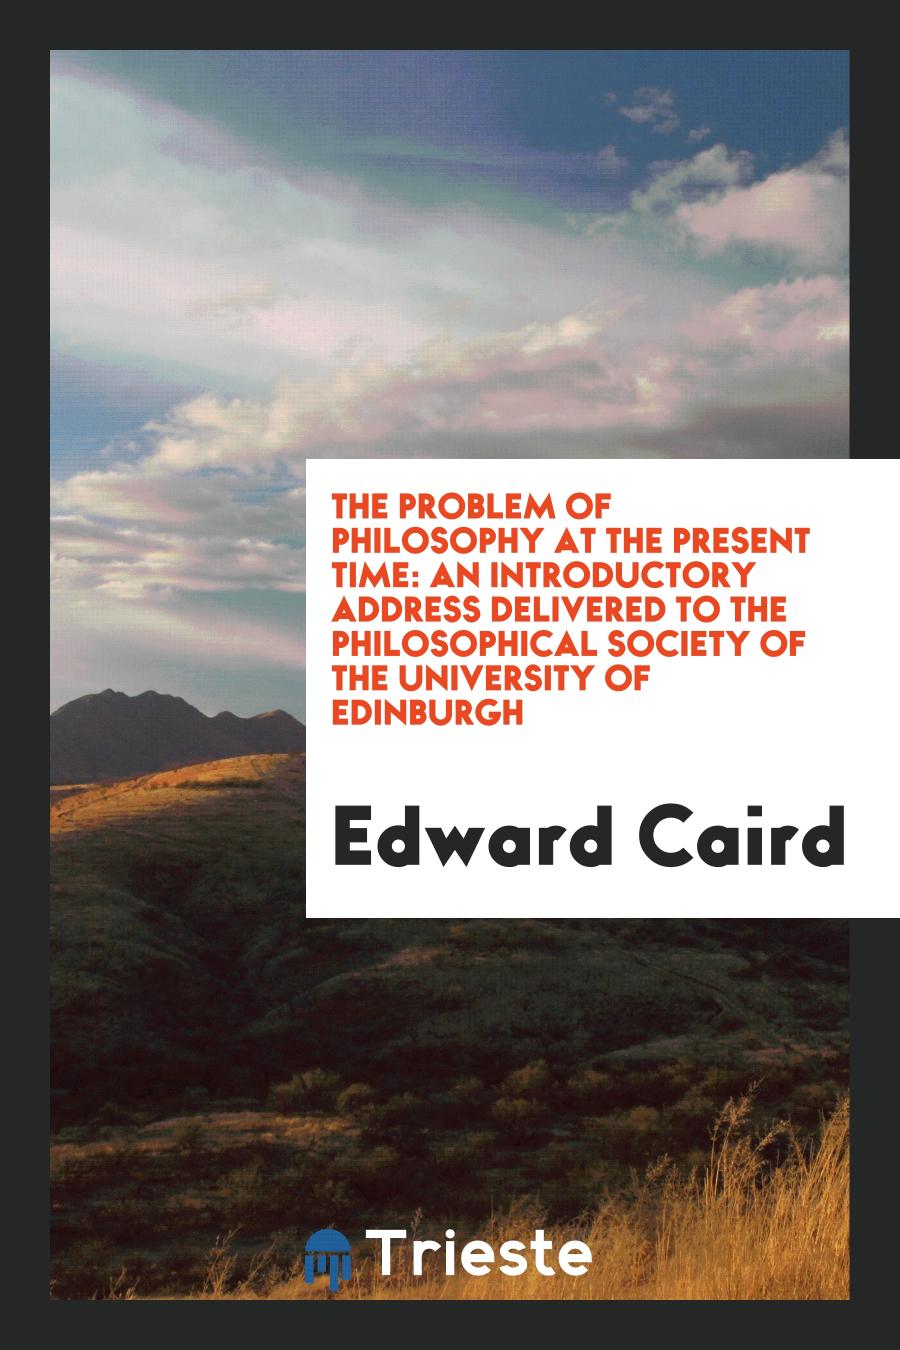 The Problem of Philosophy at the Present Time: An Introductory Address Delivered to the Philosophical Society of the University of Edinburgh